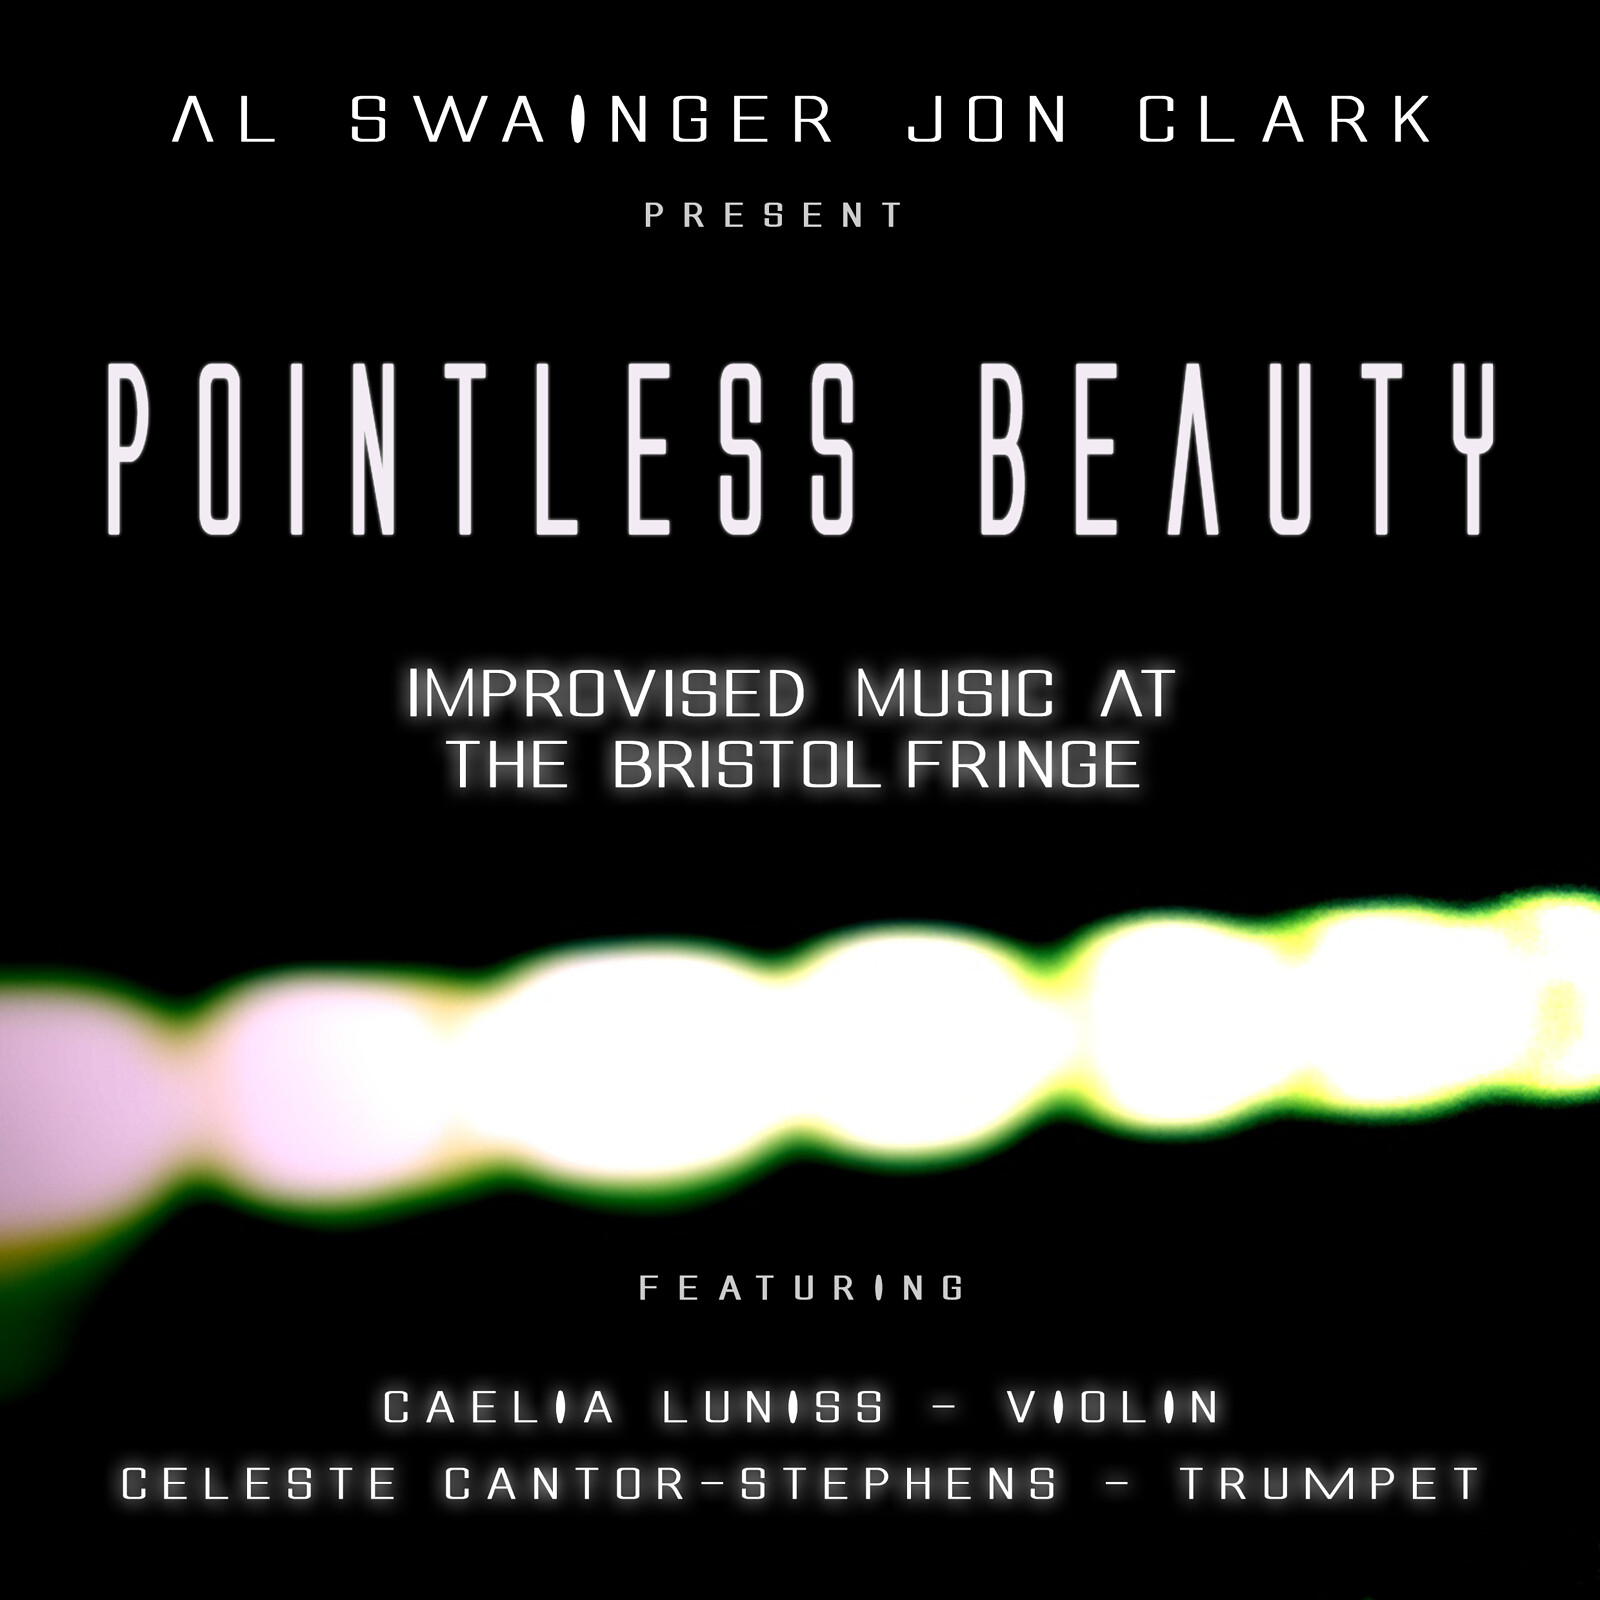 Pointless Beauty at The Bristol Fringe